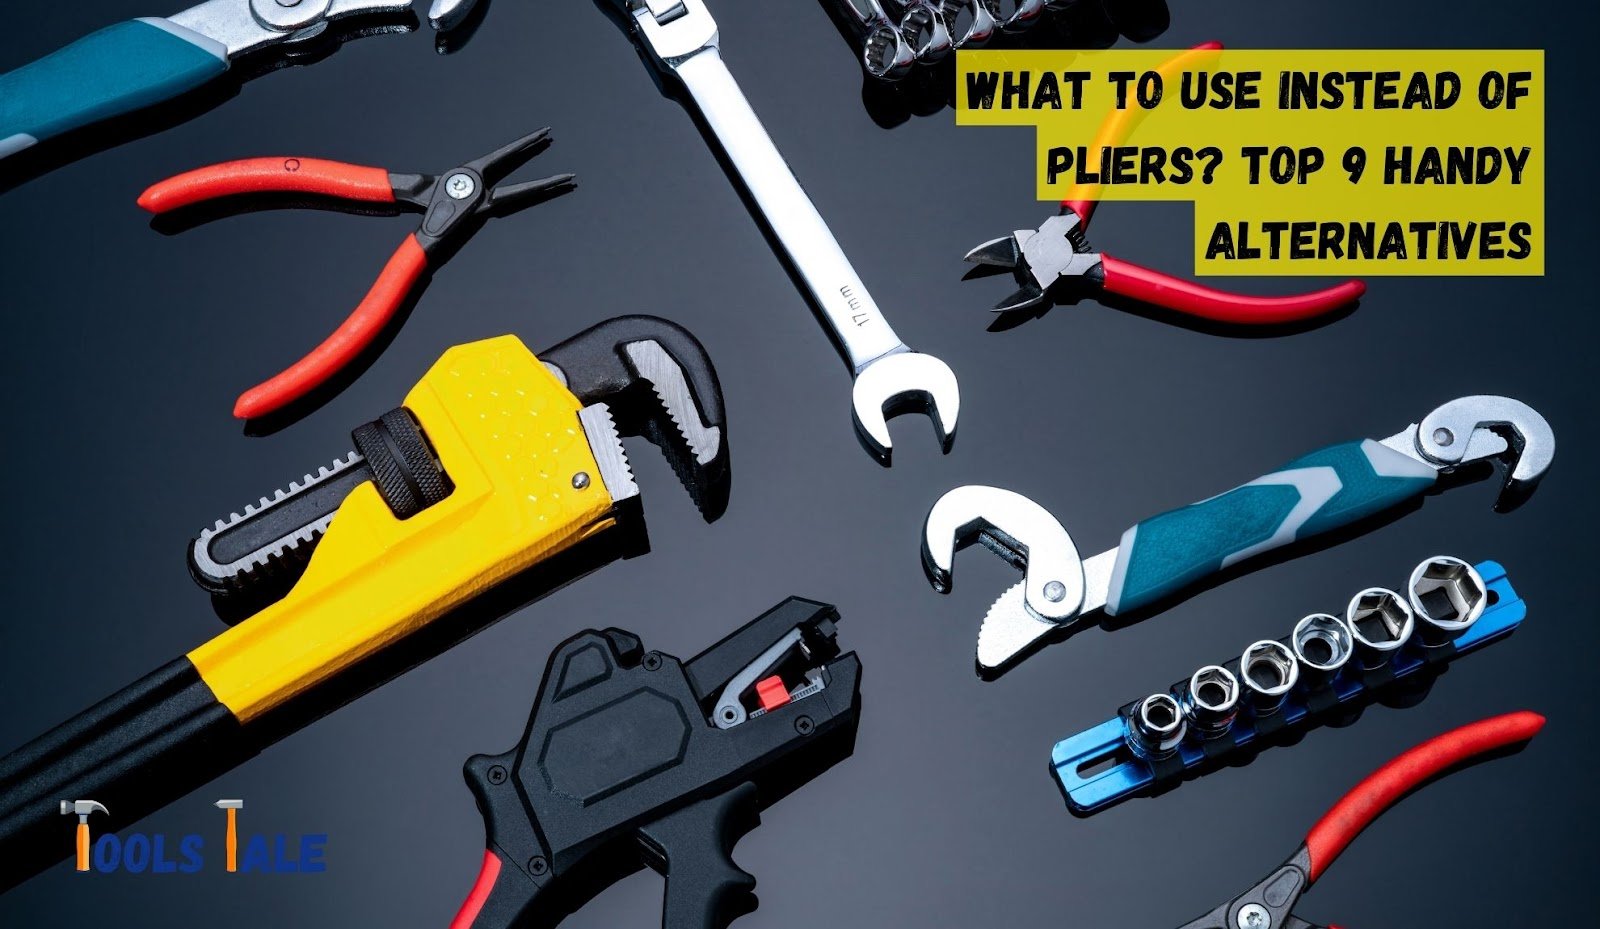 What to Use Instead of Pliers